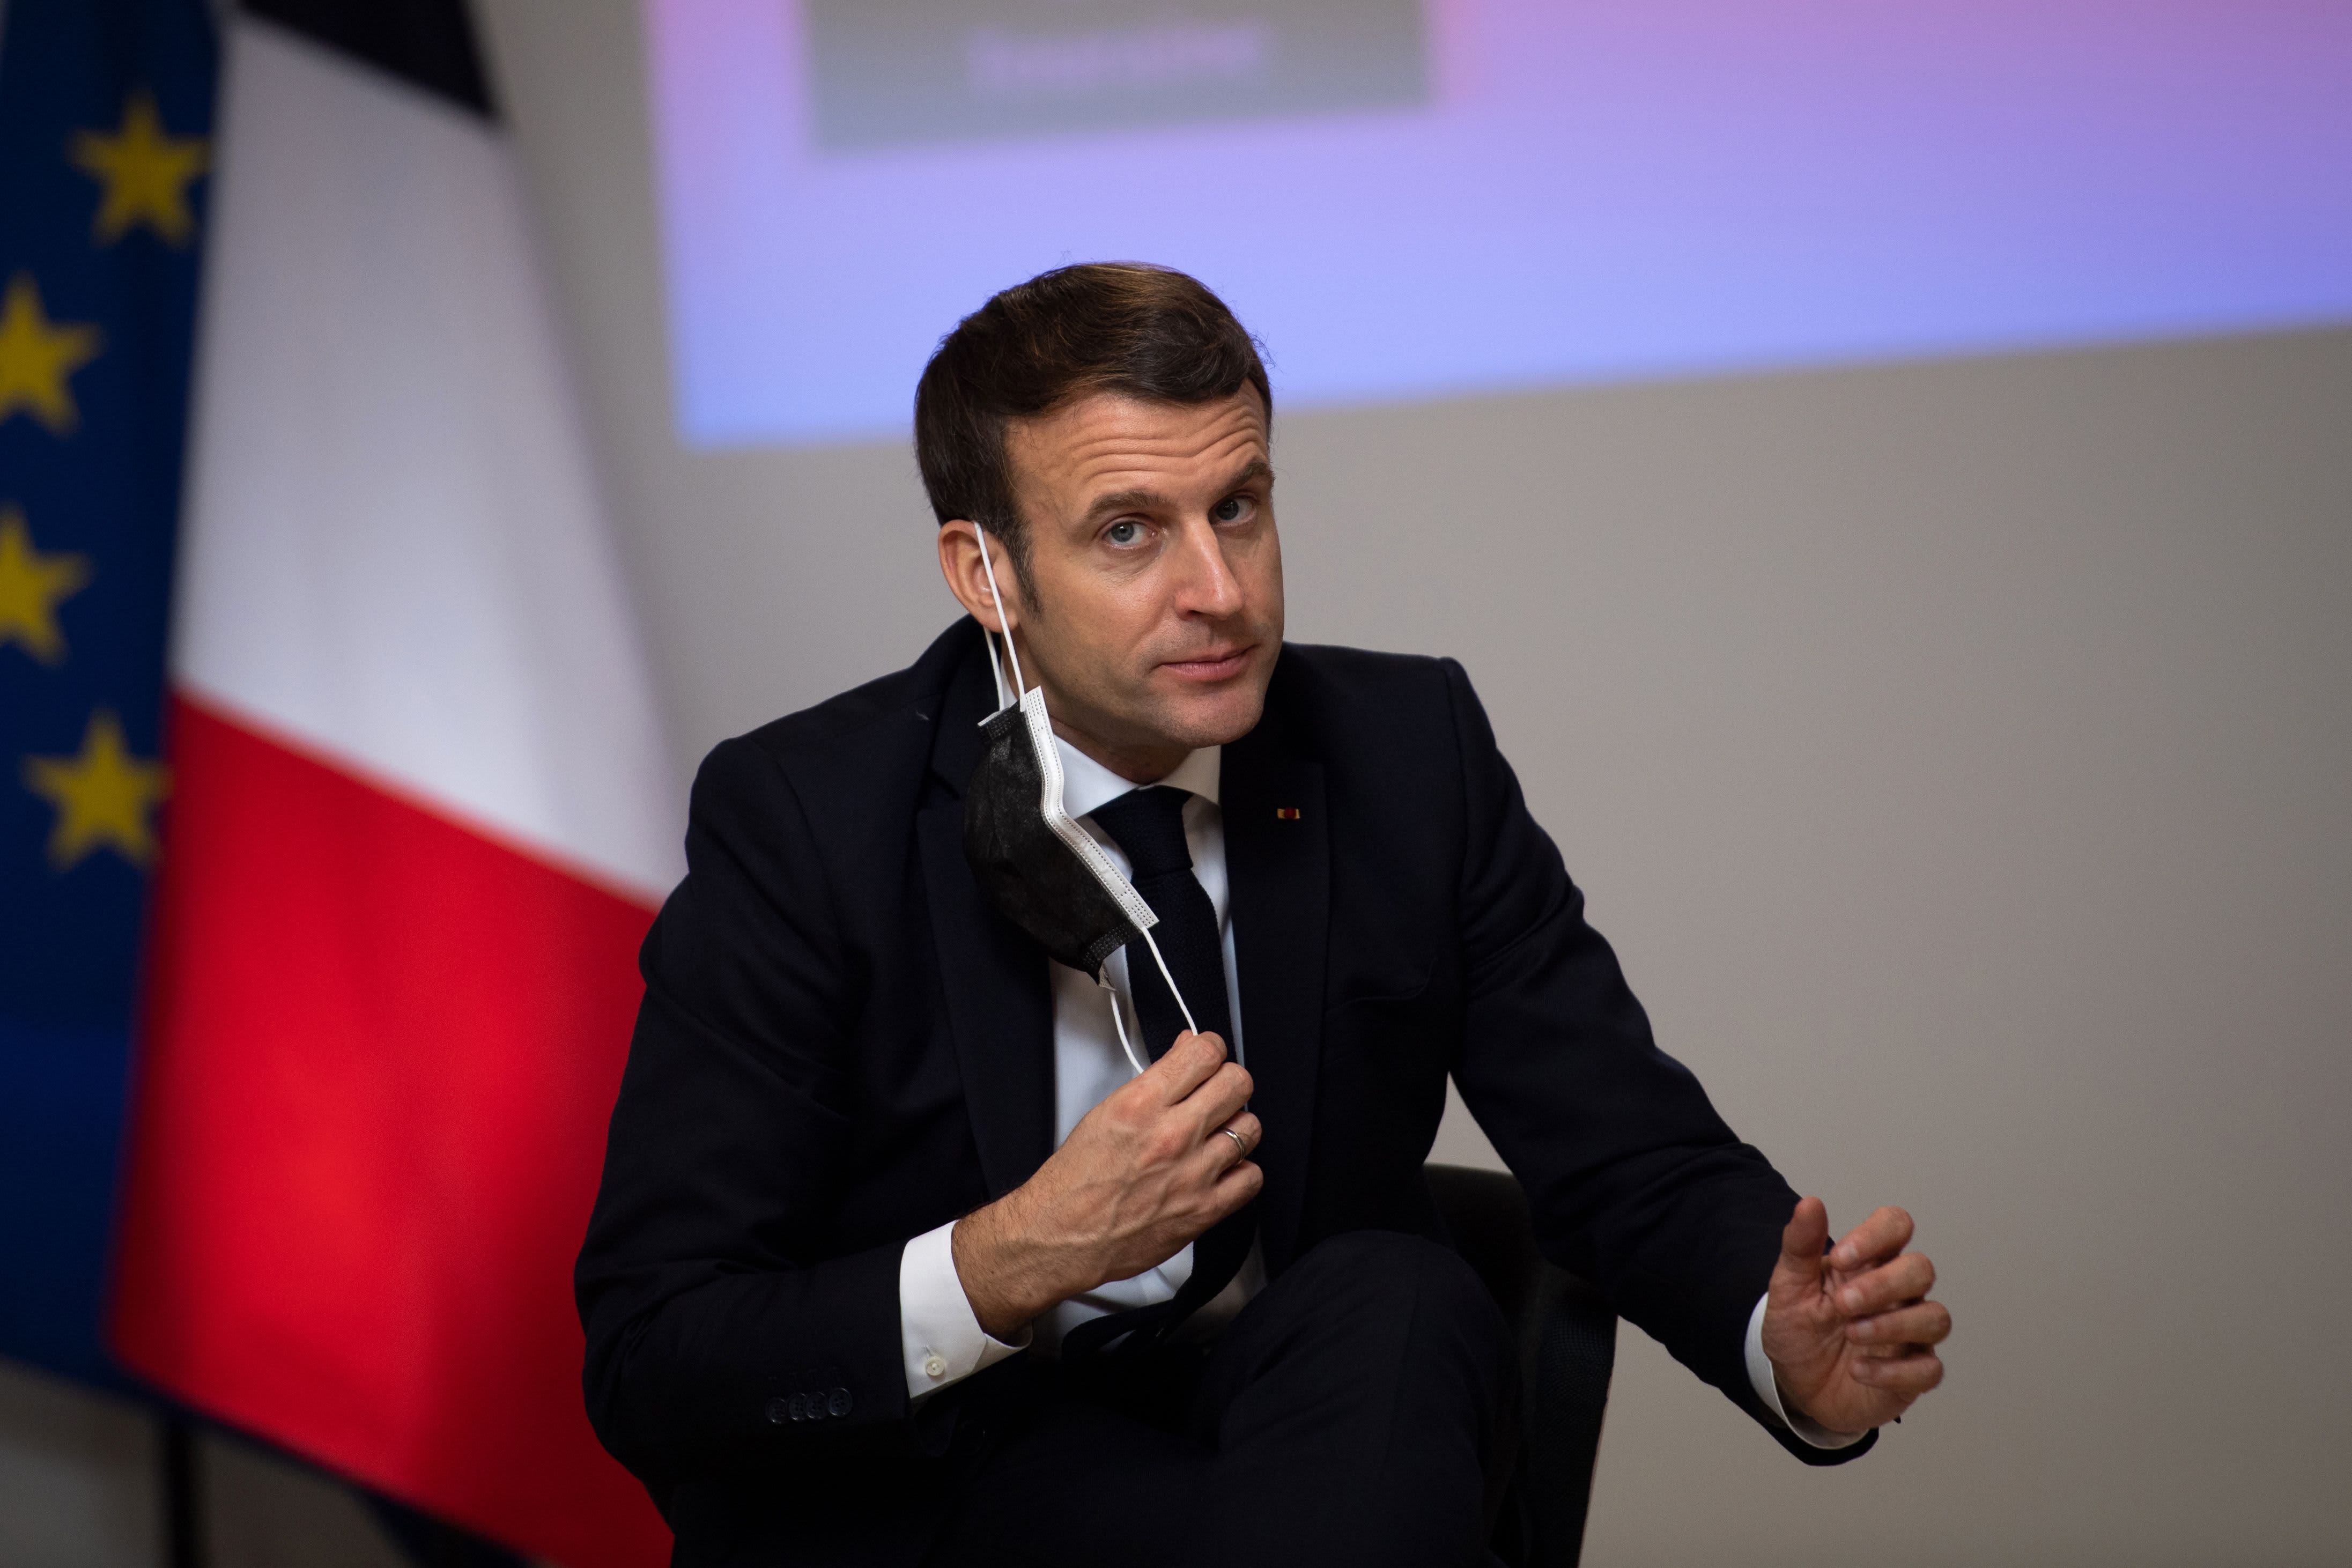 The launch could hurt Macron’s chances of re-election